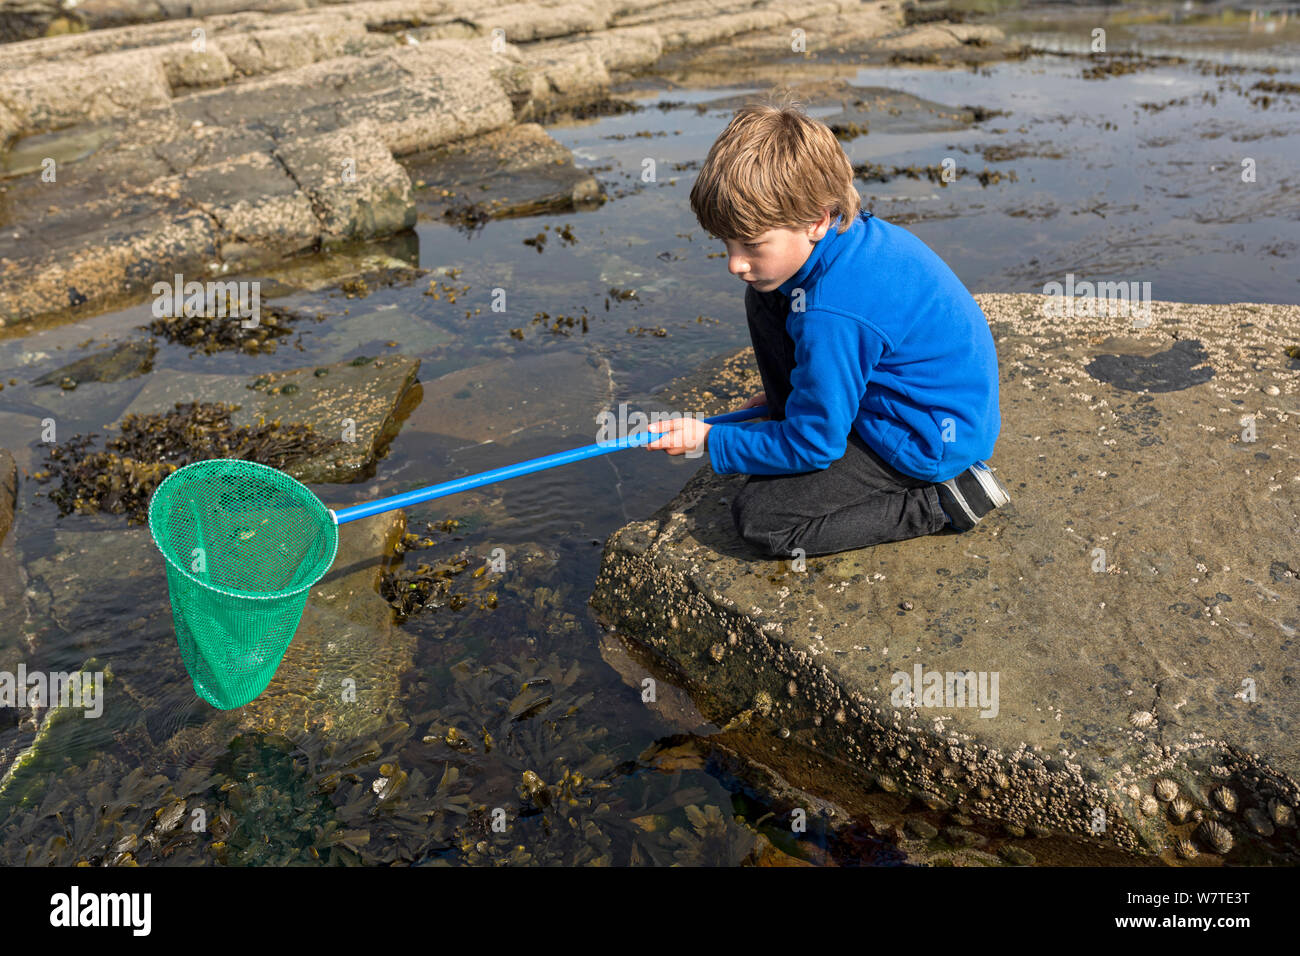 Young boy rock pooling, Pollock Holes, Kilkee, County Clare, Ireland, May 2013. Model released. Meetyourneighbours.net project Stock Photo